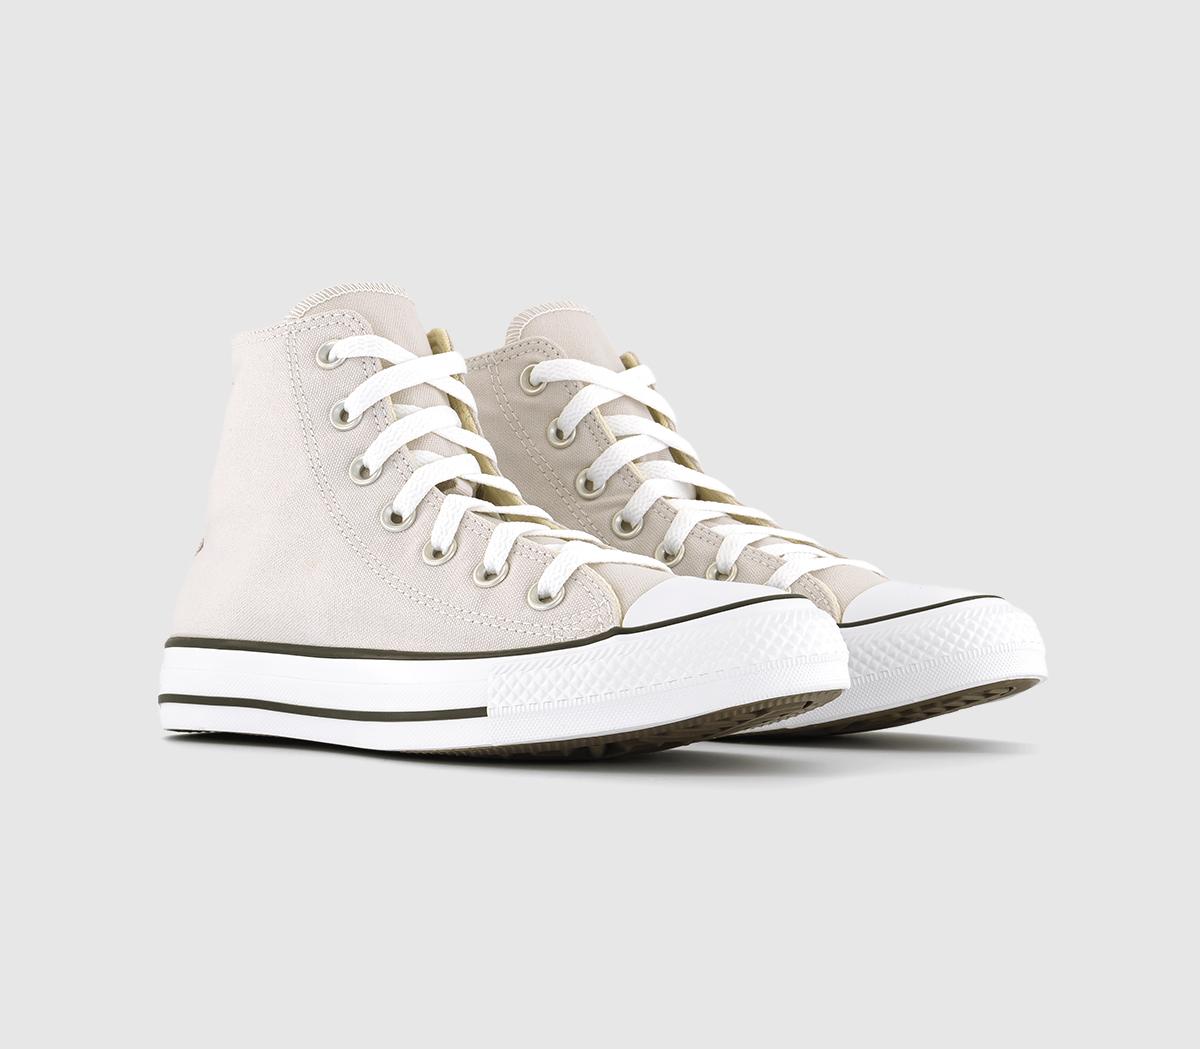 Converse All Star Hi Trainers Pale Putty White Black Natural, 3